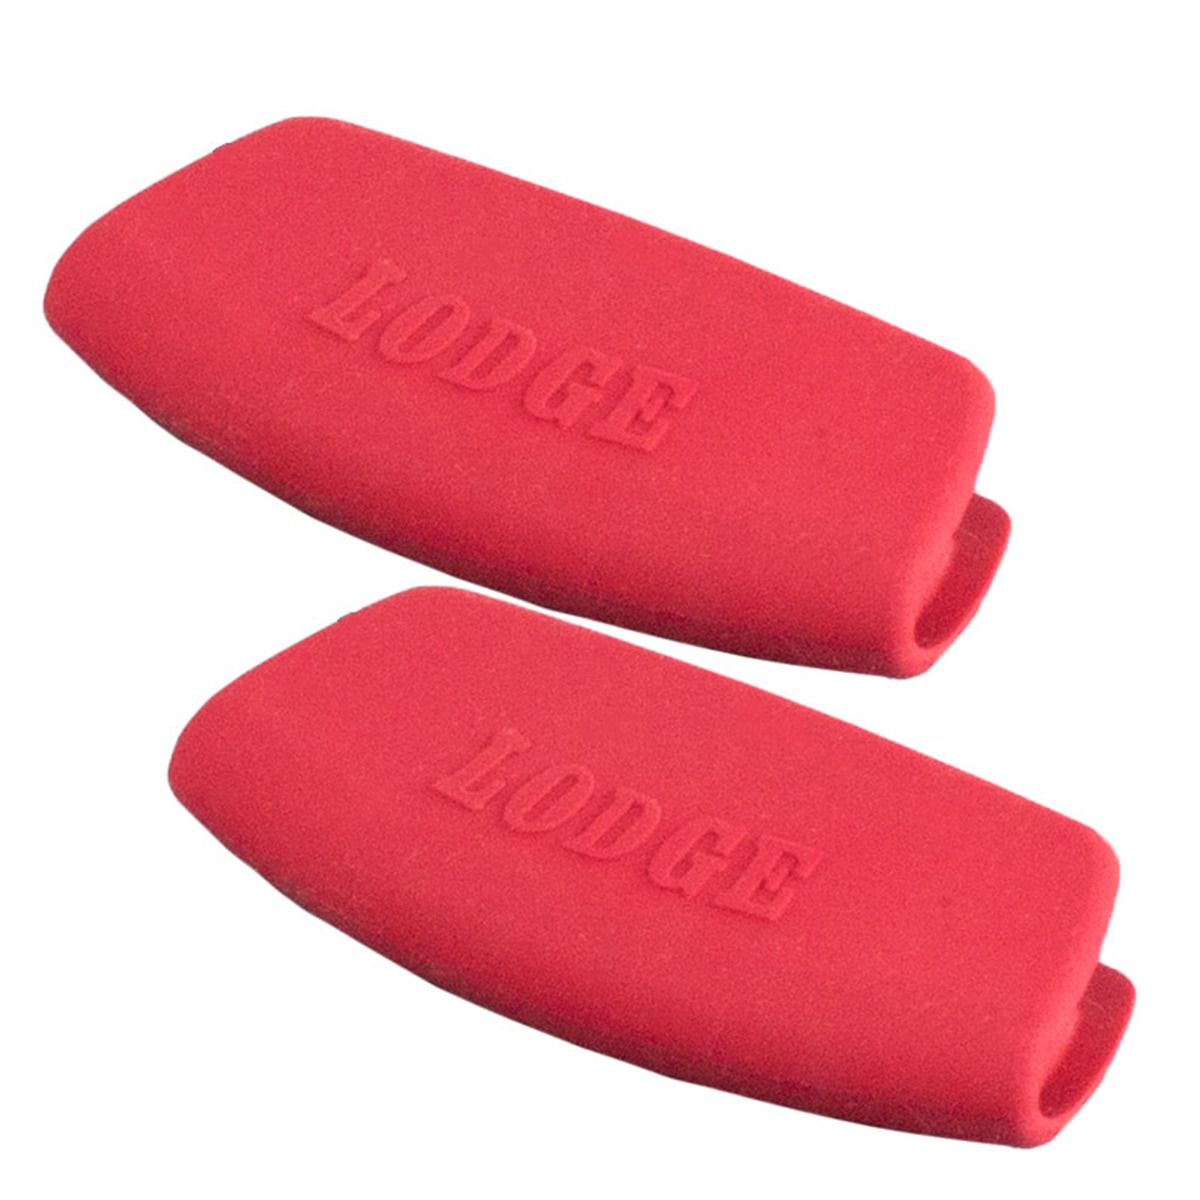 Red Silicone Bakeware Grips (2pcs) - Lodge®